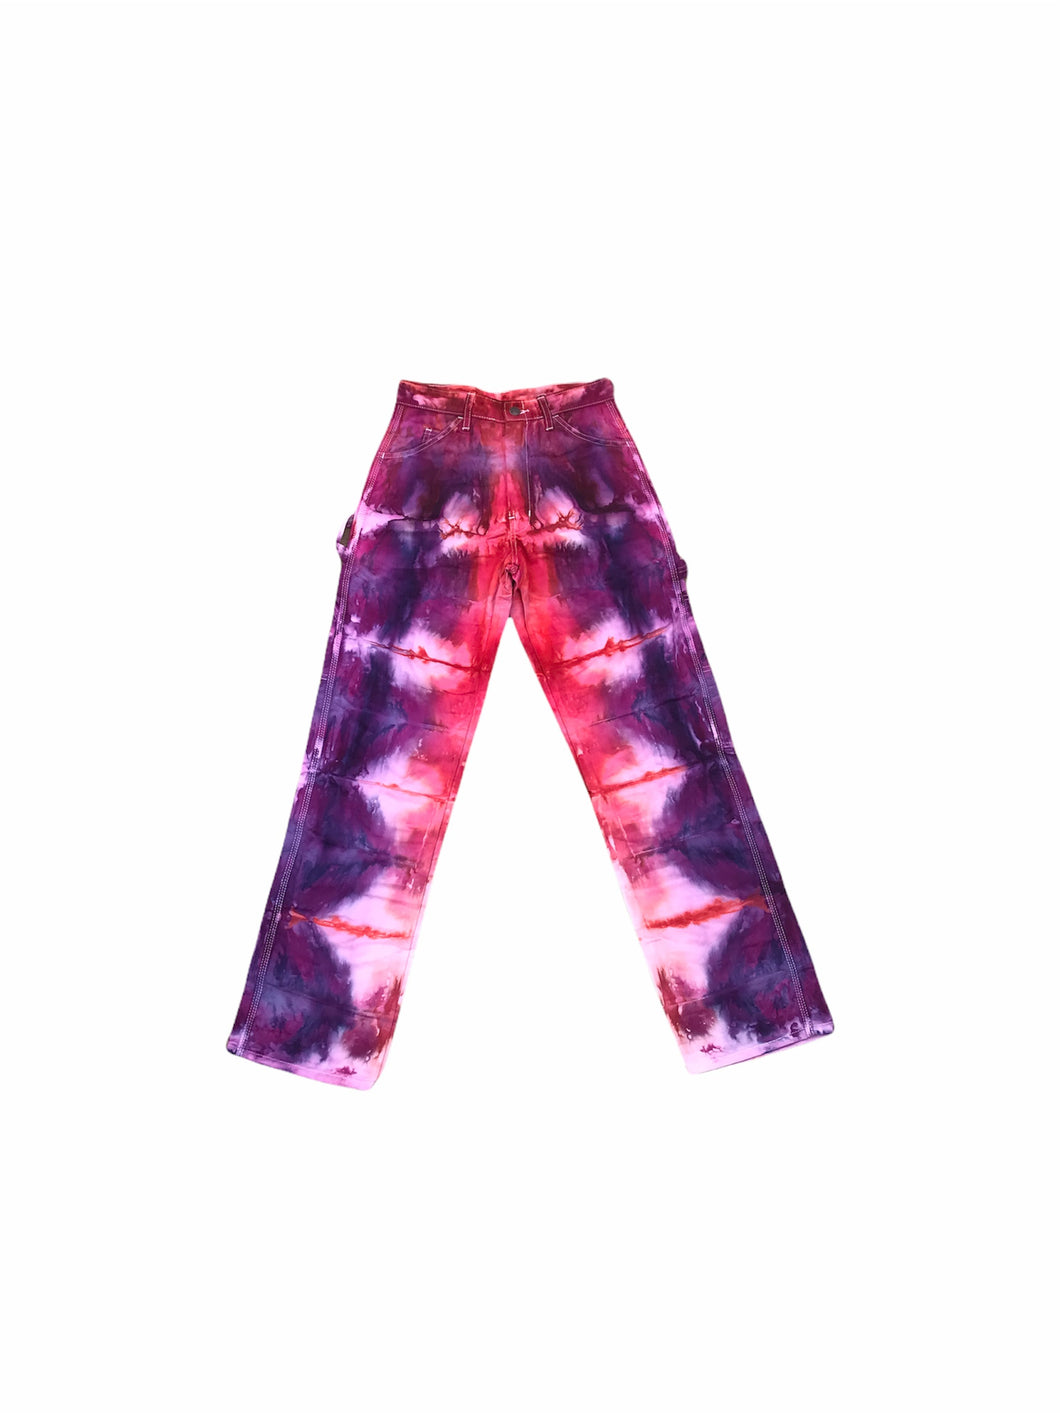 Hand Dyed Psychedelic Pant (Purple/Red)